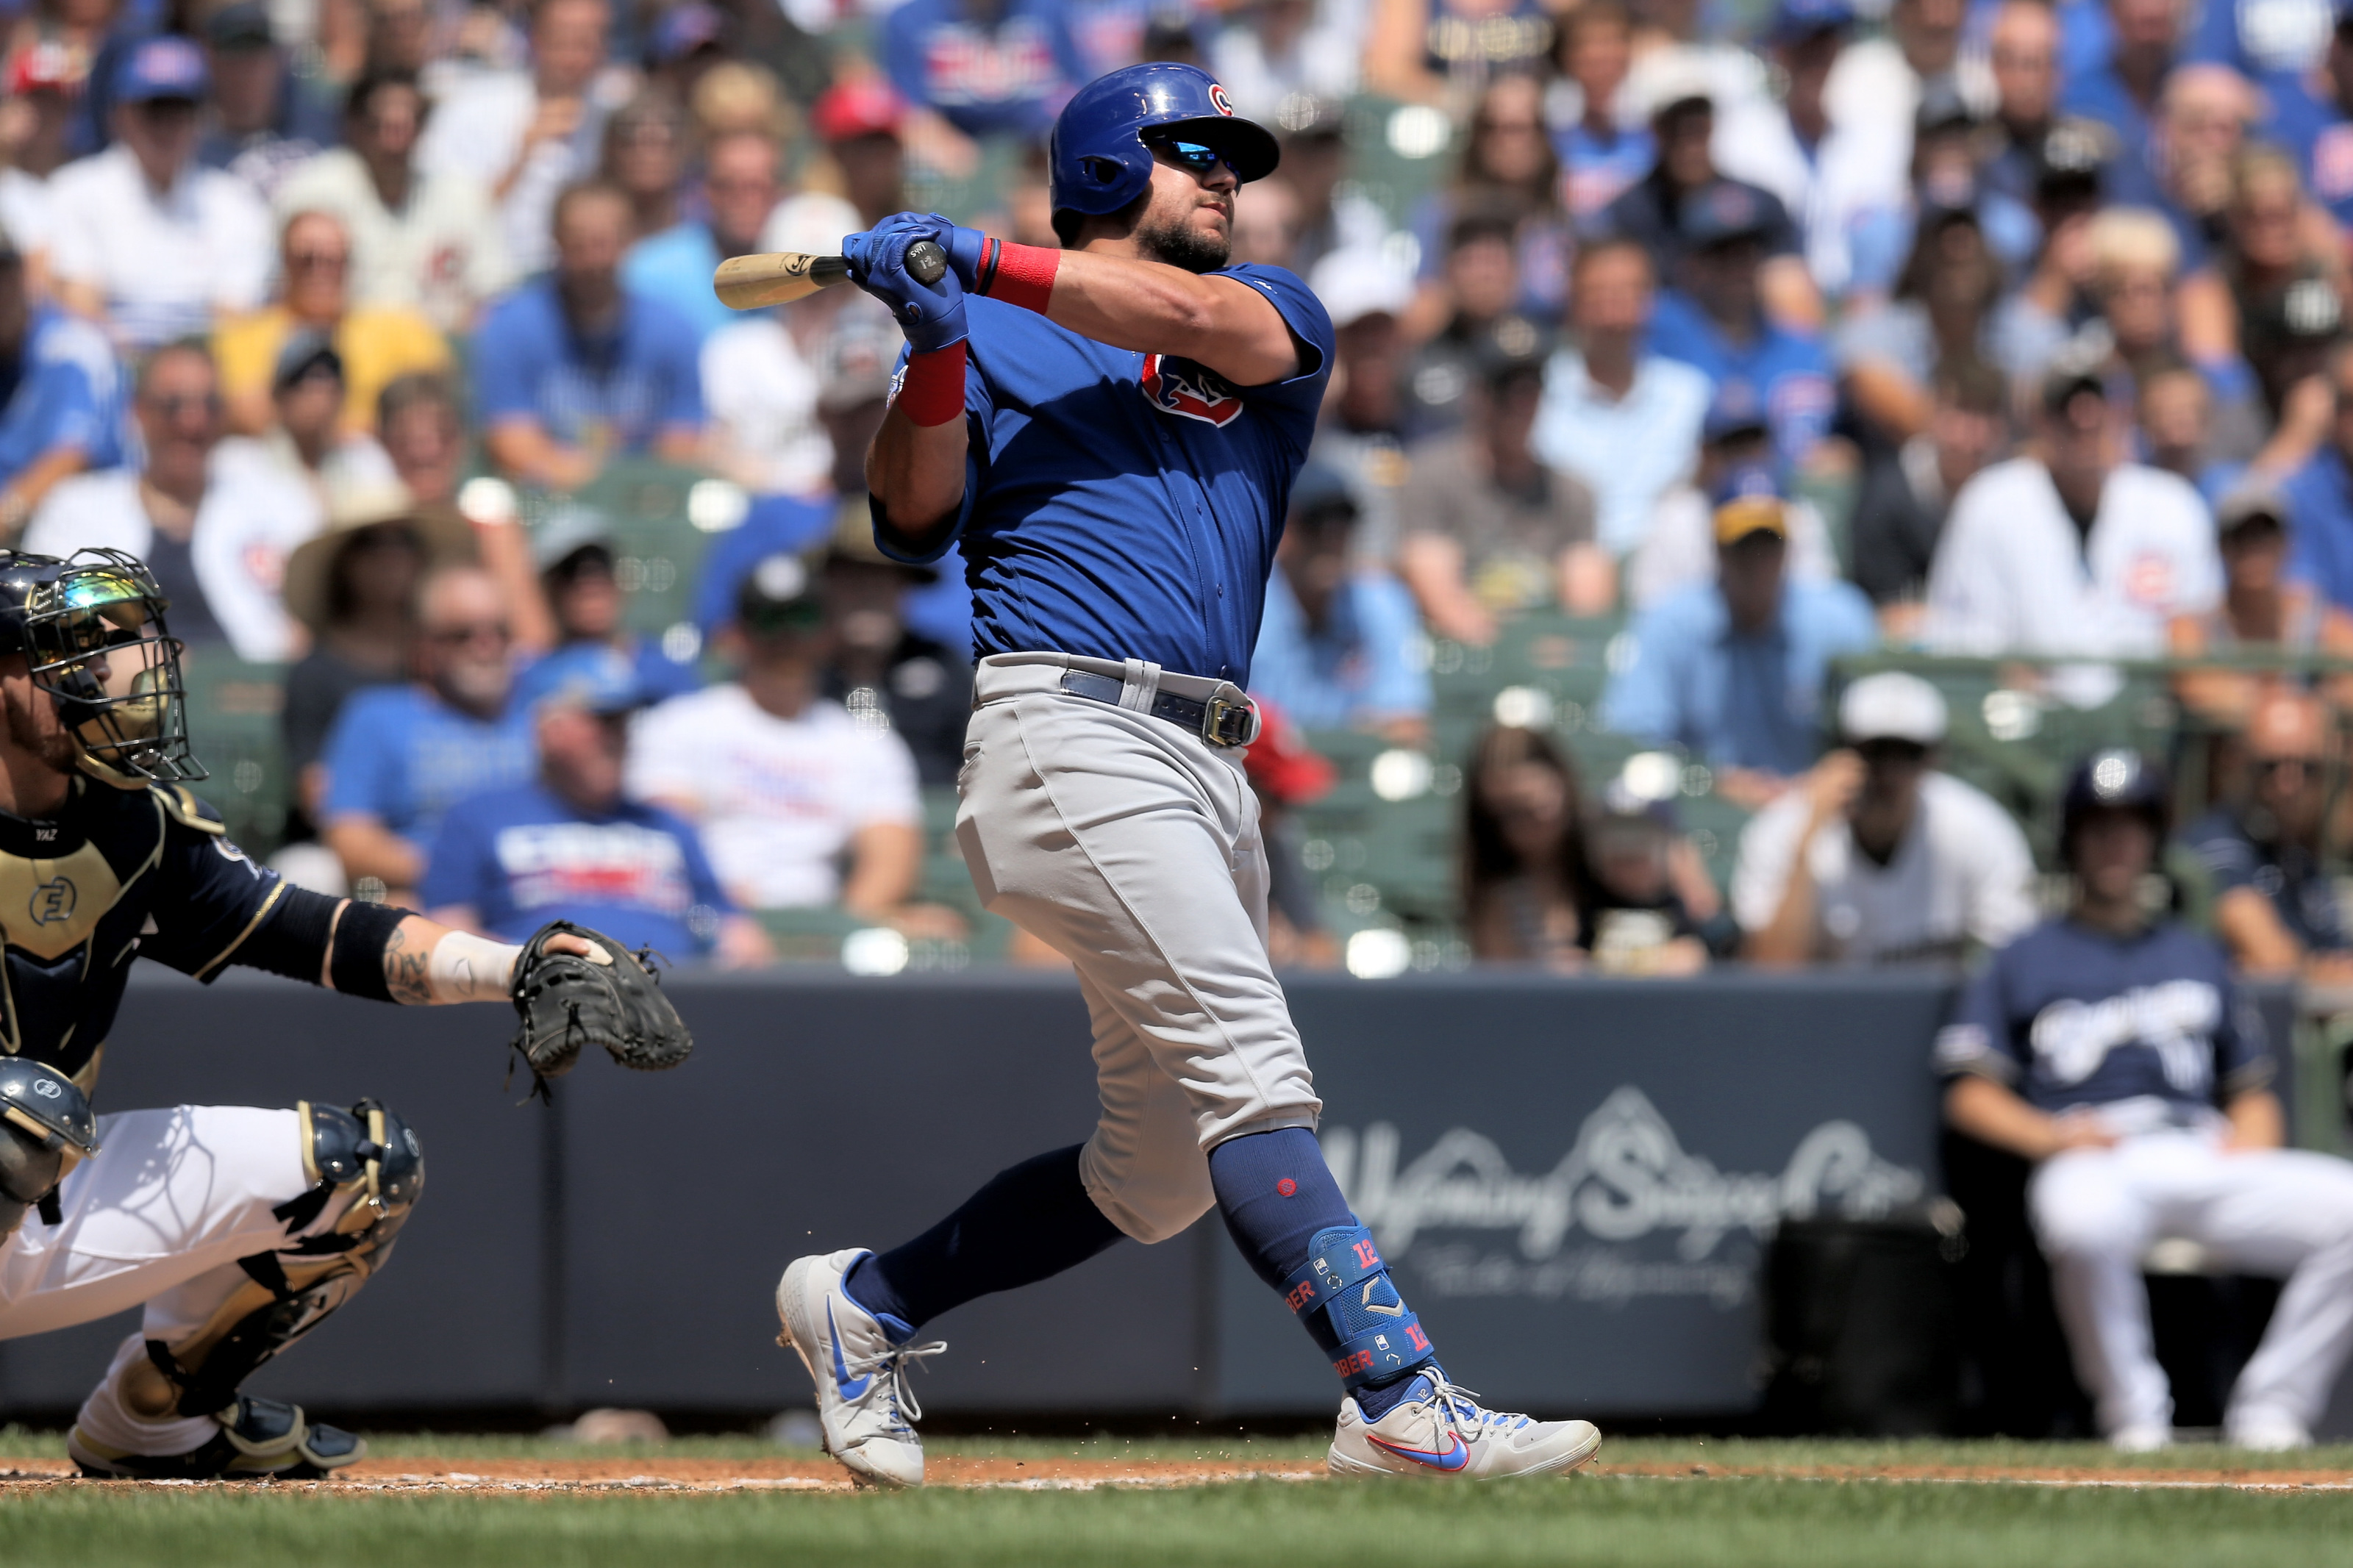 Kyle Schwarber blasts one of longest HRs in Statcast history